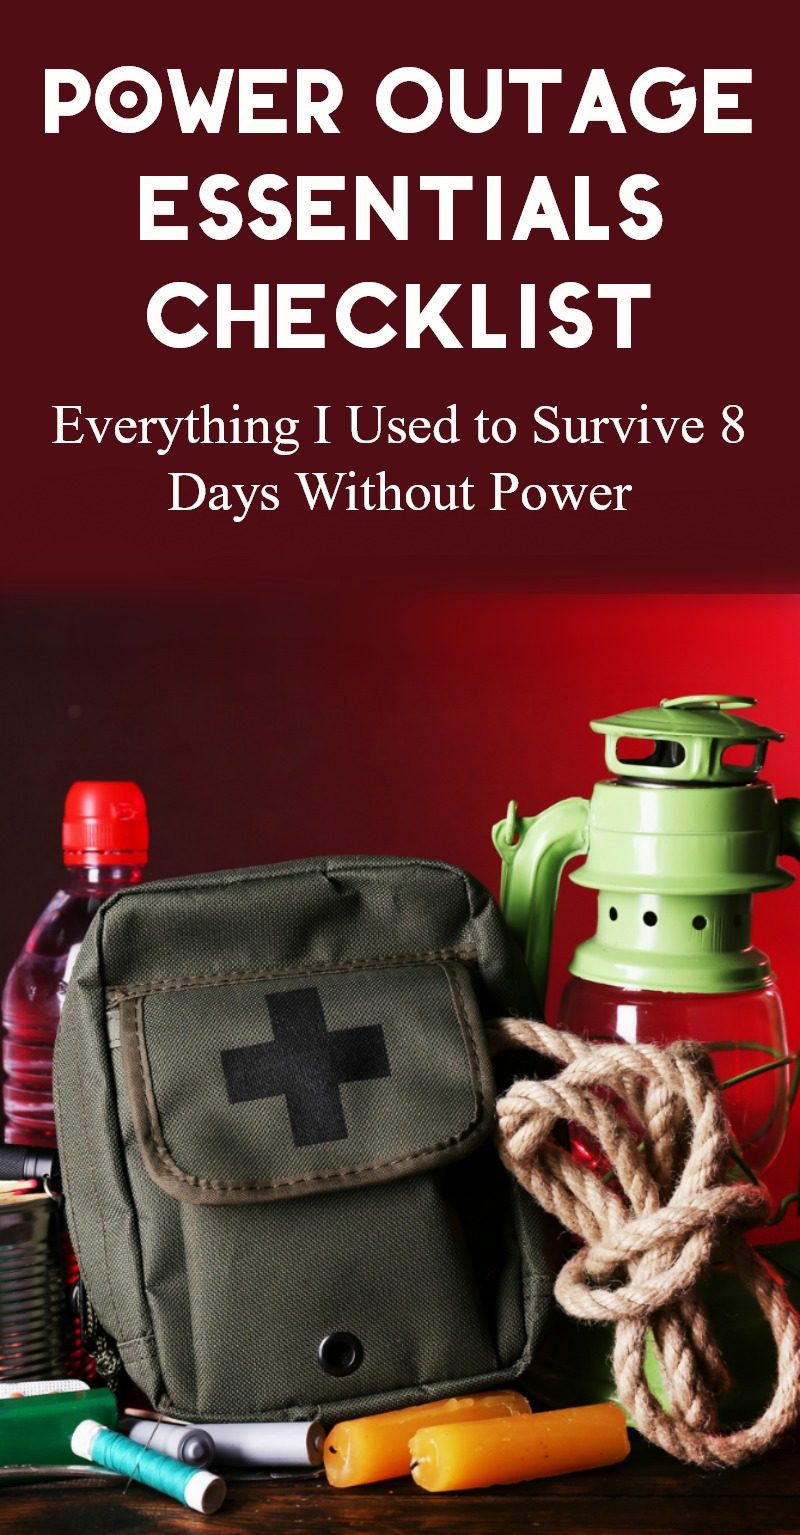 What to Do When the Power Goes Out — How to Survive Without Power